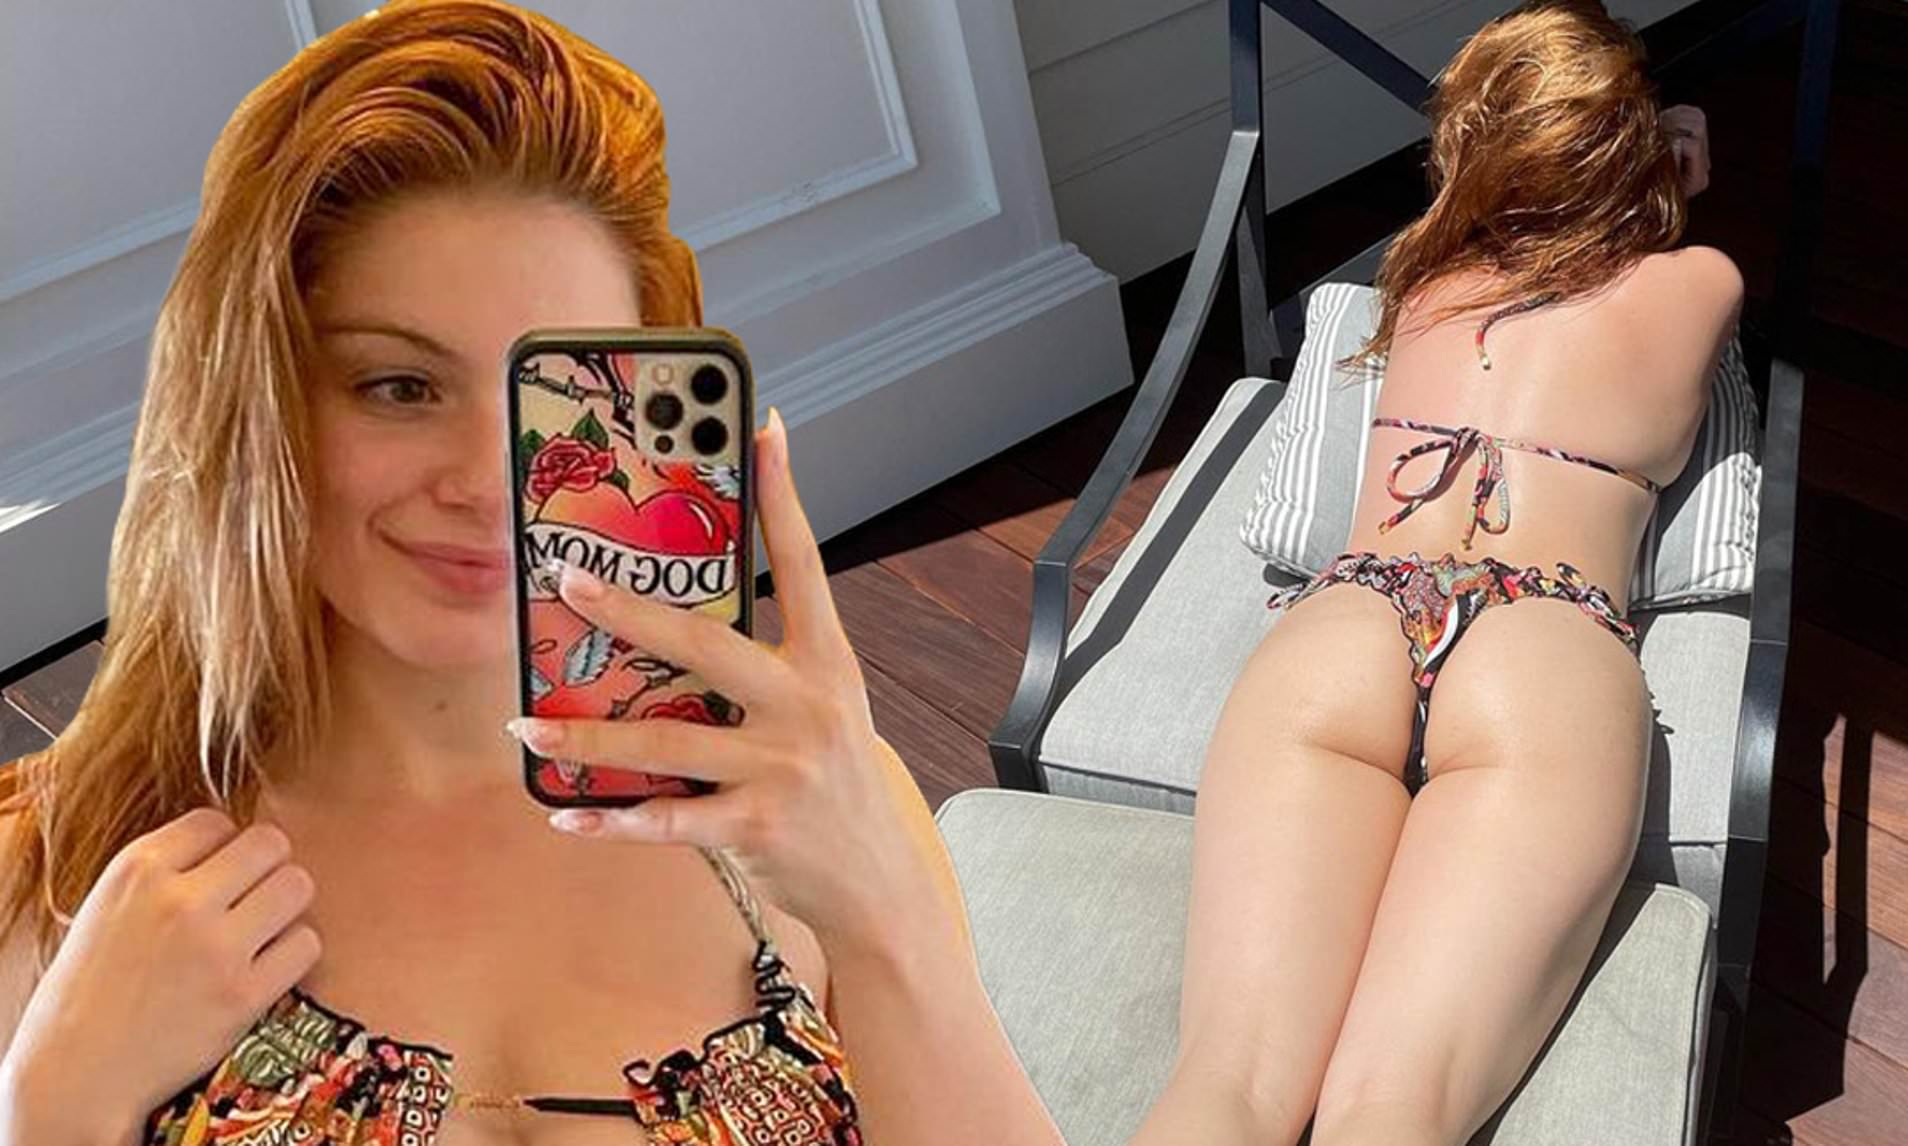 craig haug recommends ariel winter in a thong pic